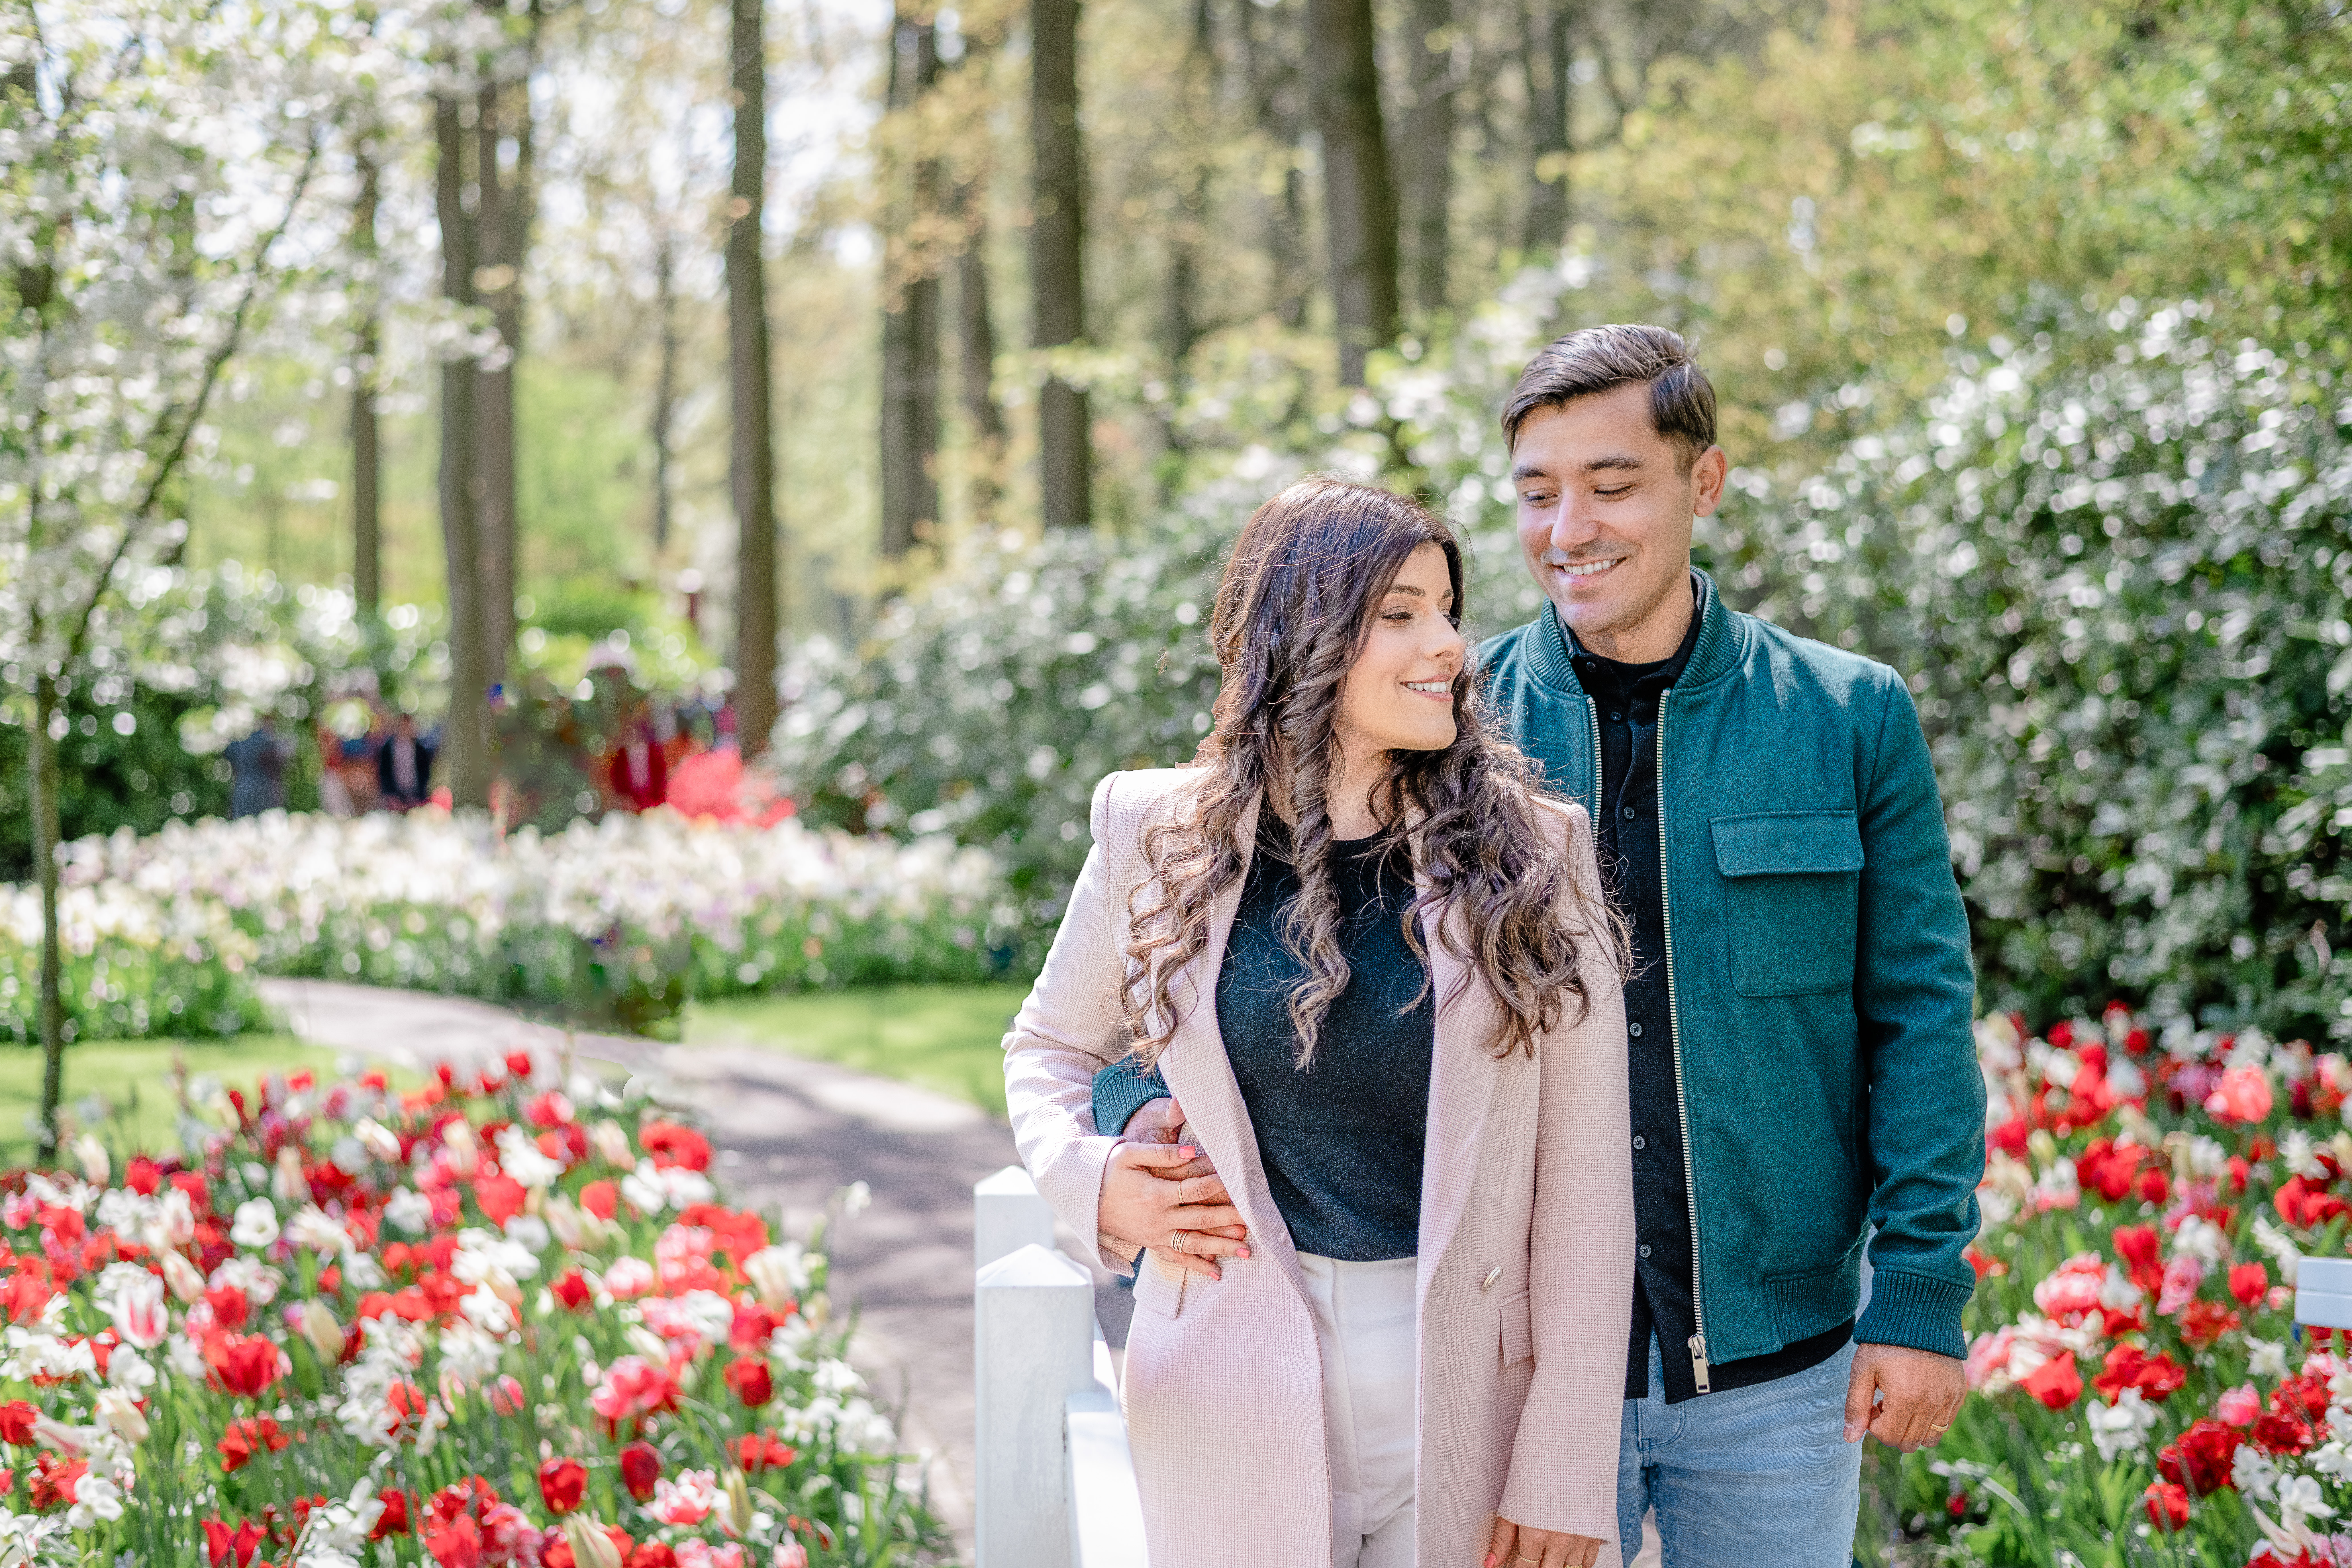 Anniversary photoshoot of husband and wife looking at each other strolling through the keukenhof garden full of blooming tulips